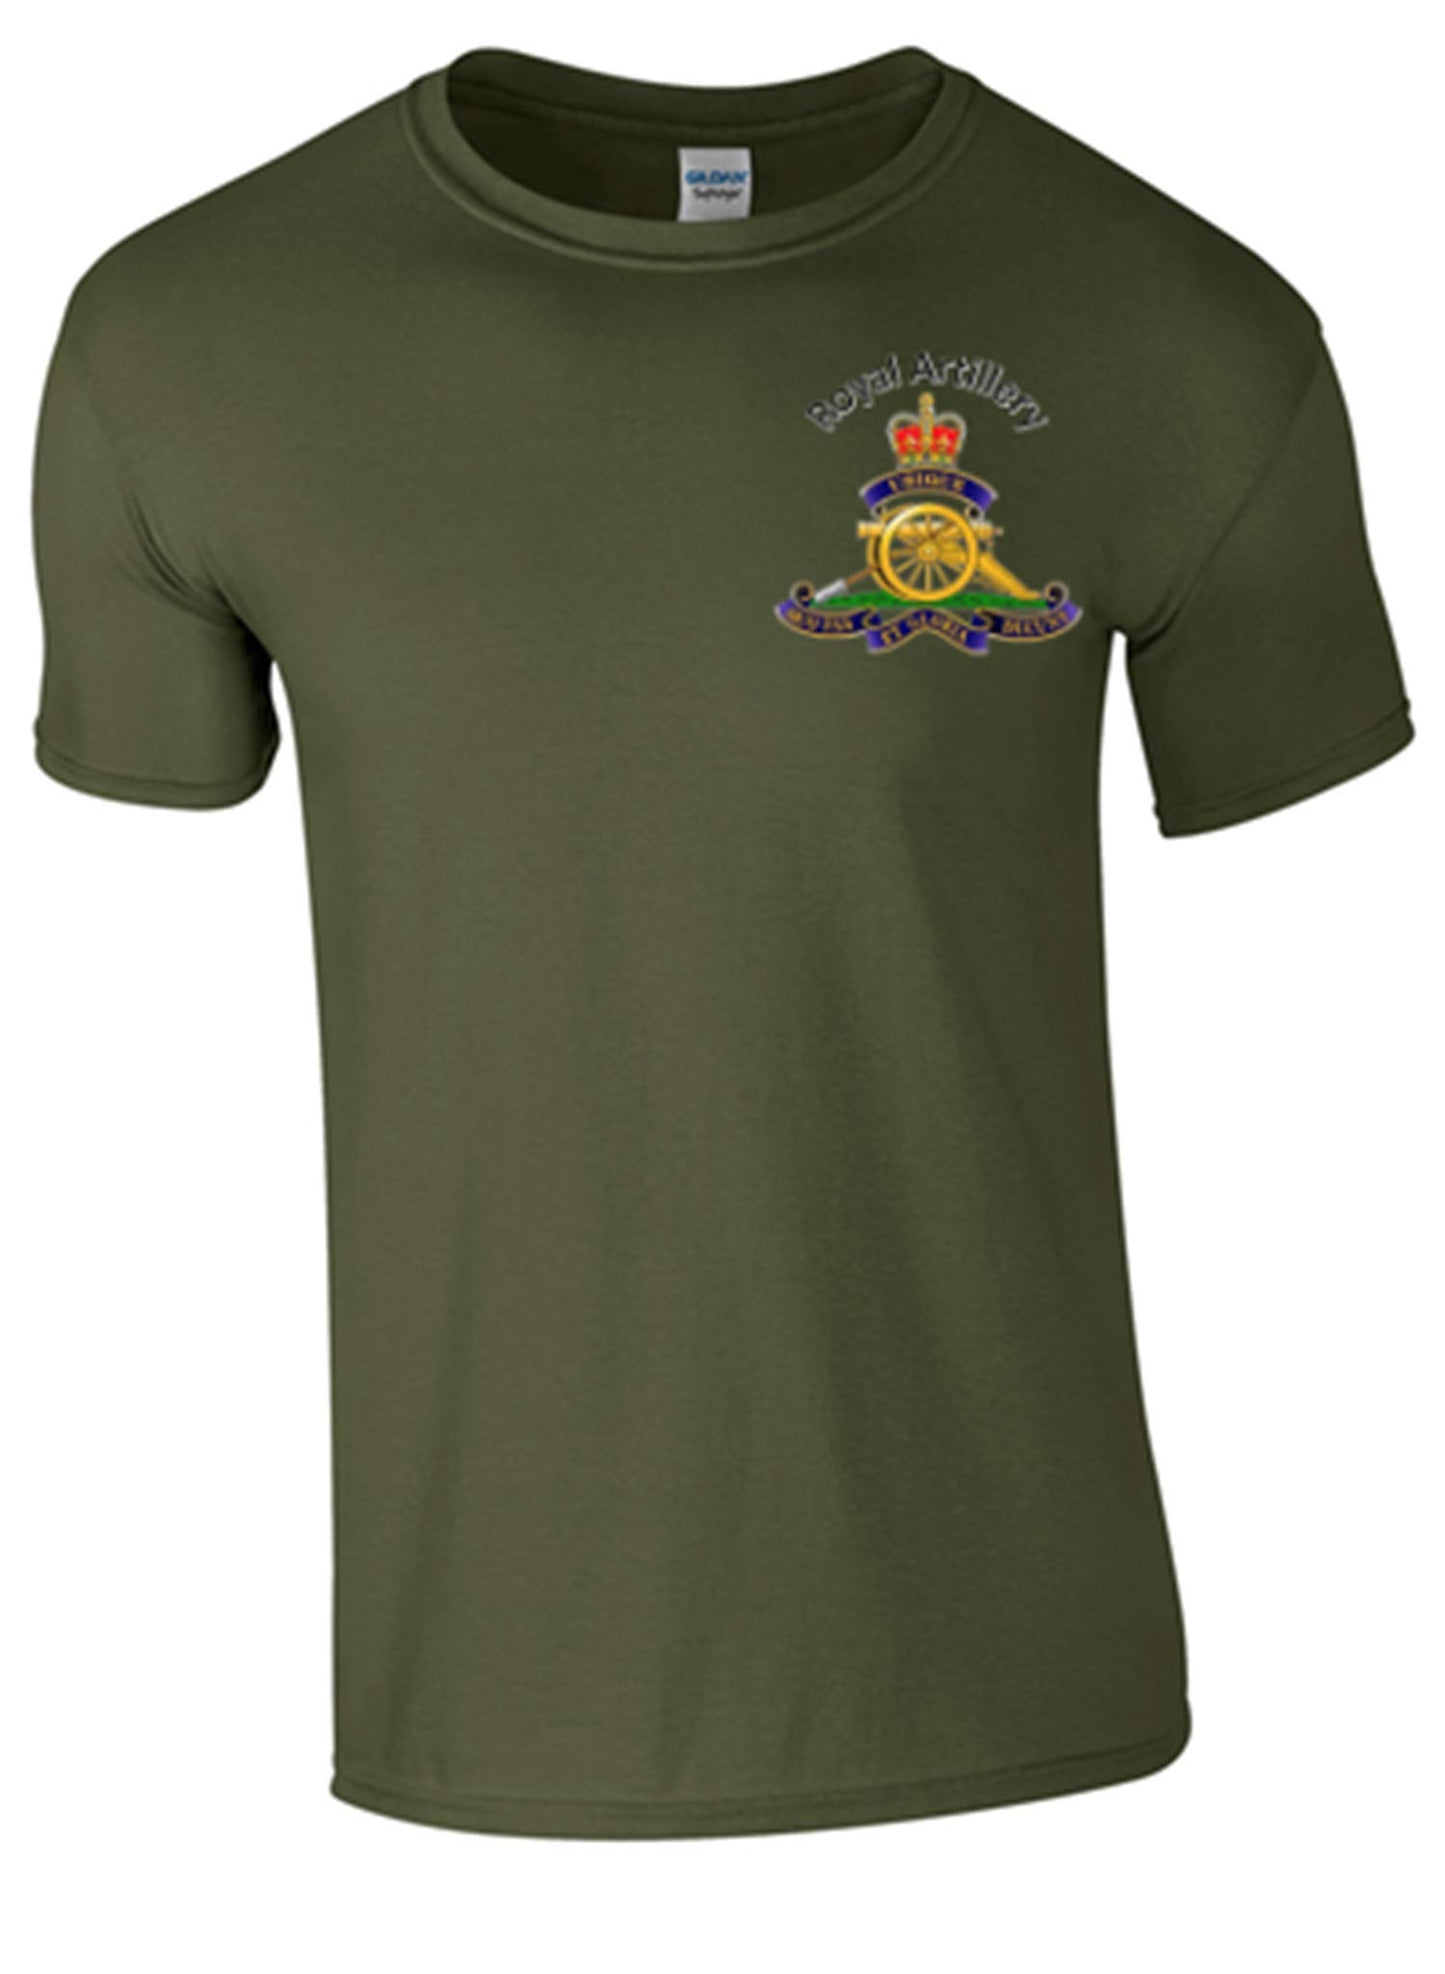 Army 1157 Kit The Royal Regiment of Artillery T-Shirt - Army 1157 kit Green / XL Army 1157 Kit